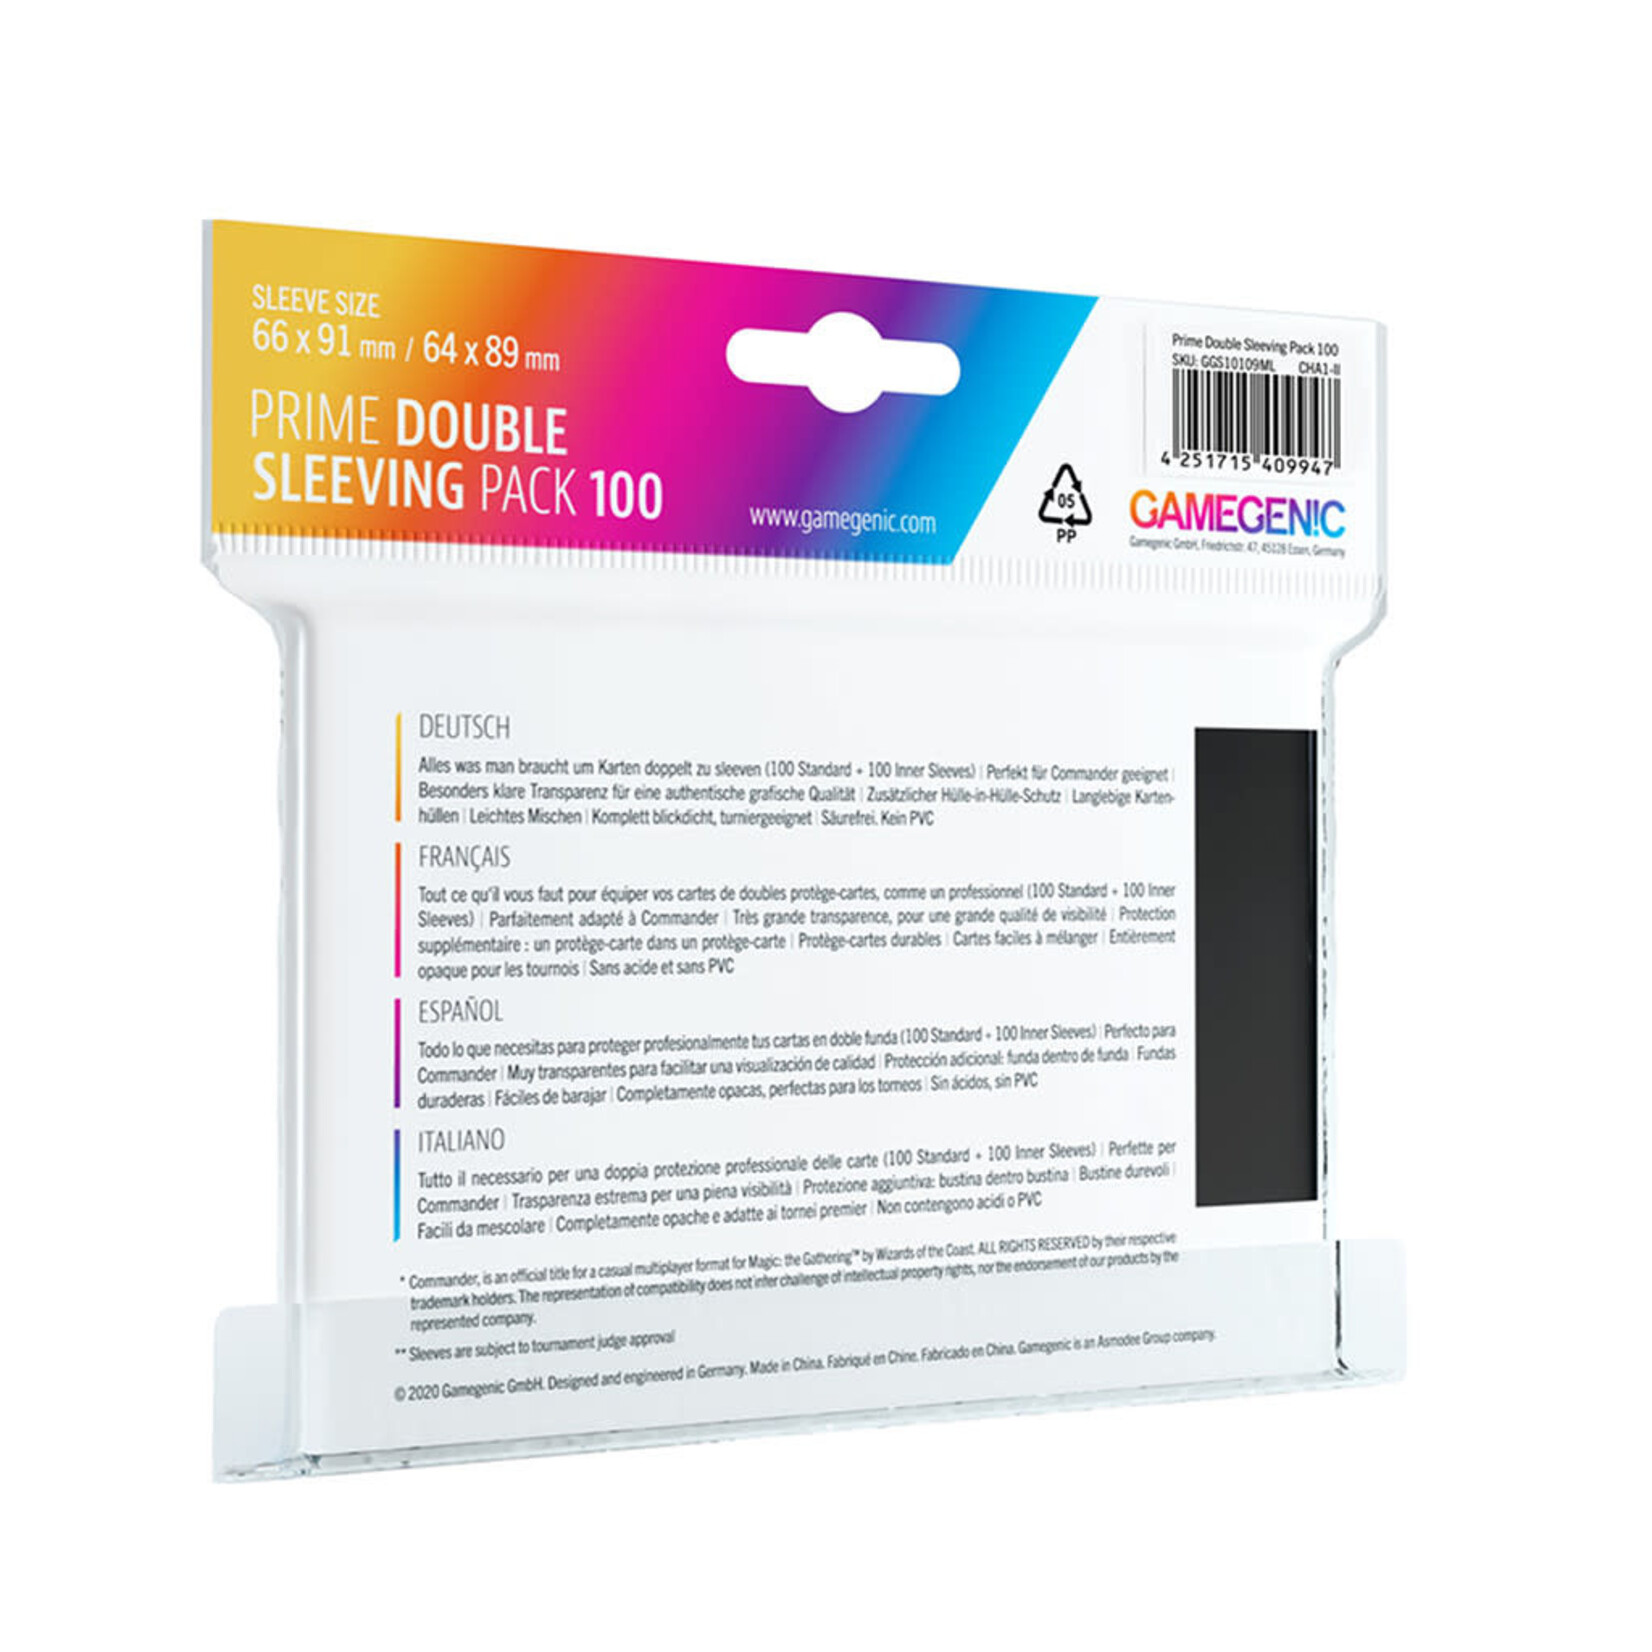 Gamegenic Prime Double Sleeving Pack 100